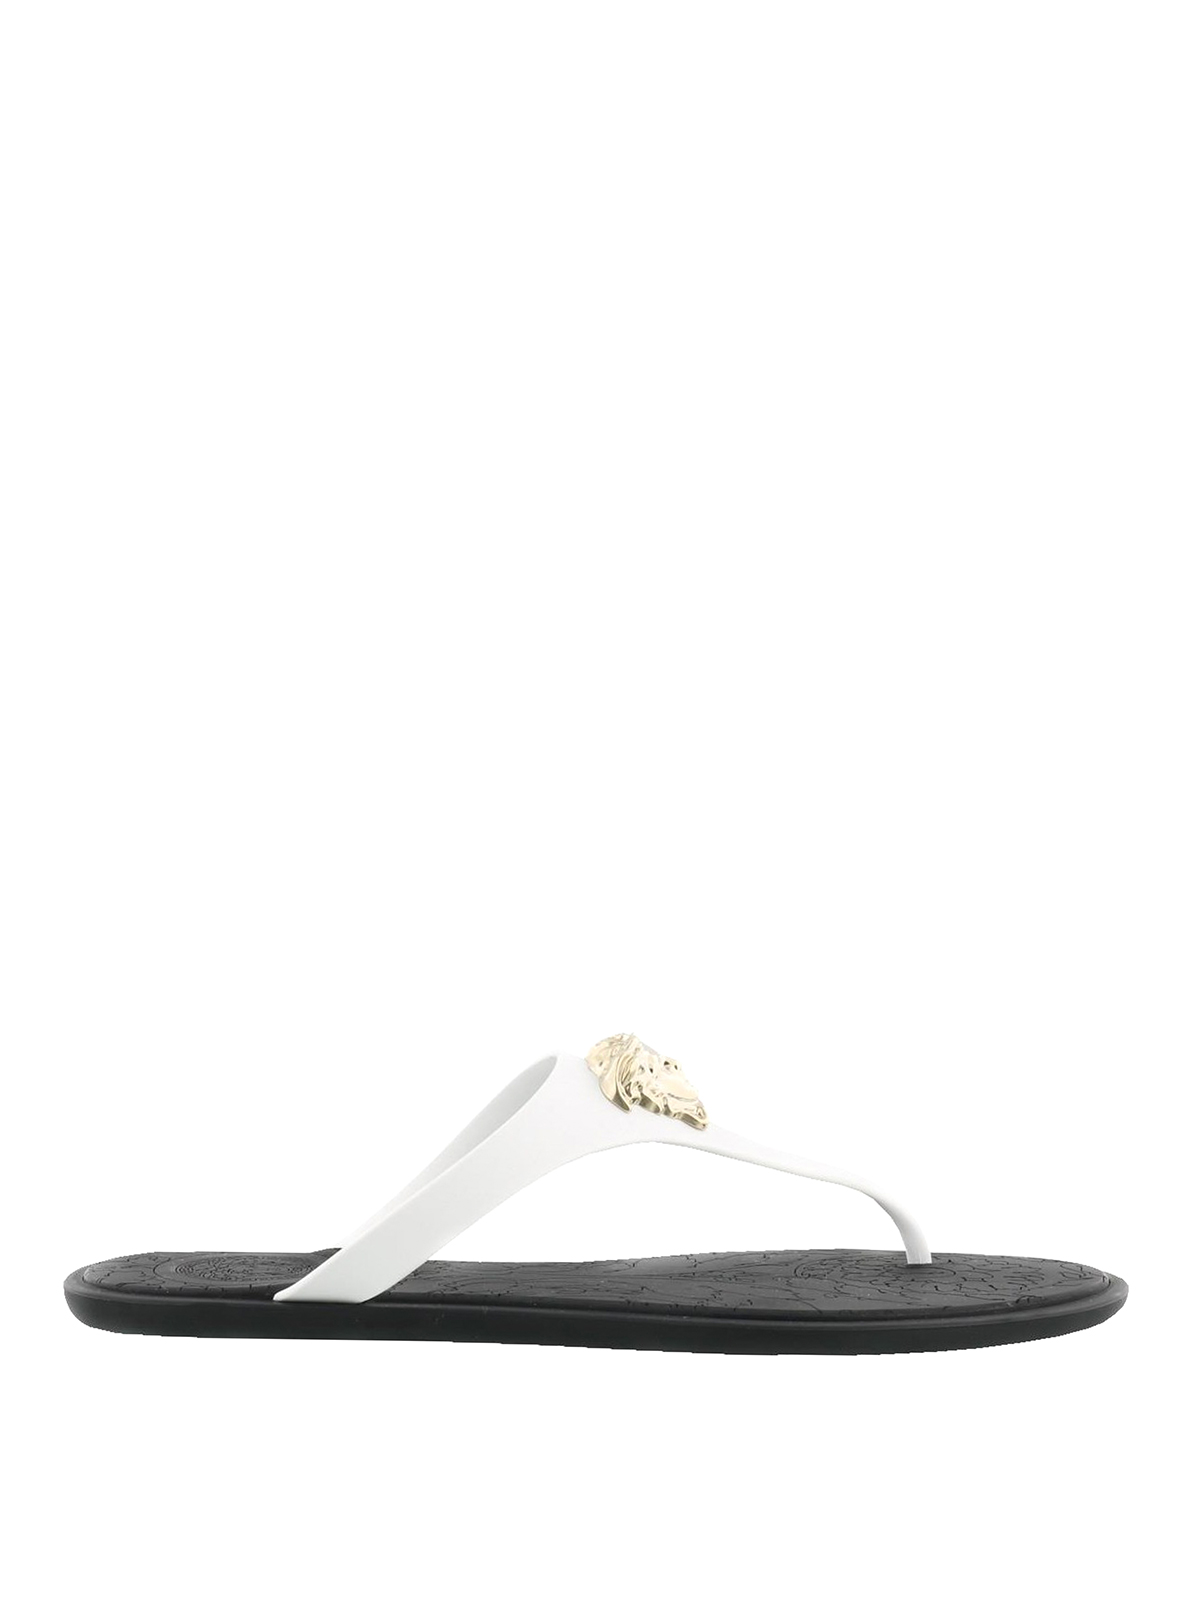 Versace Palazzo Leather Thong Sandals | vlr.eng.br